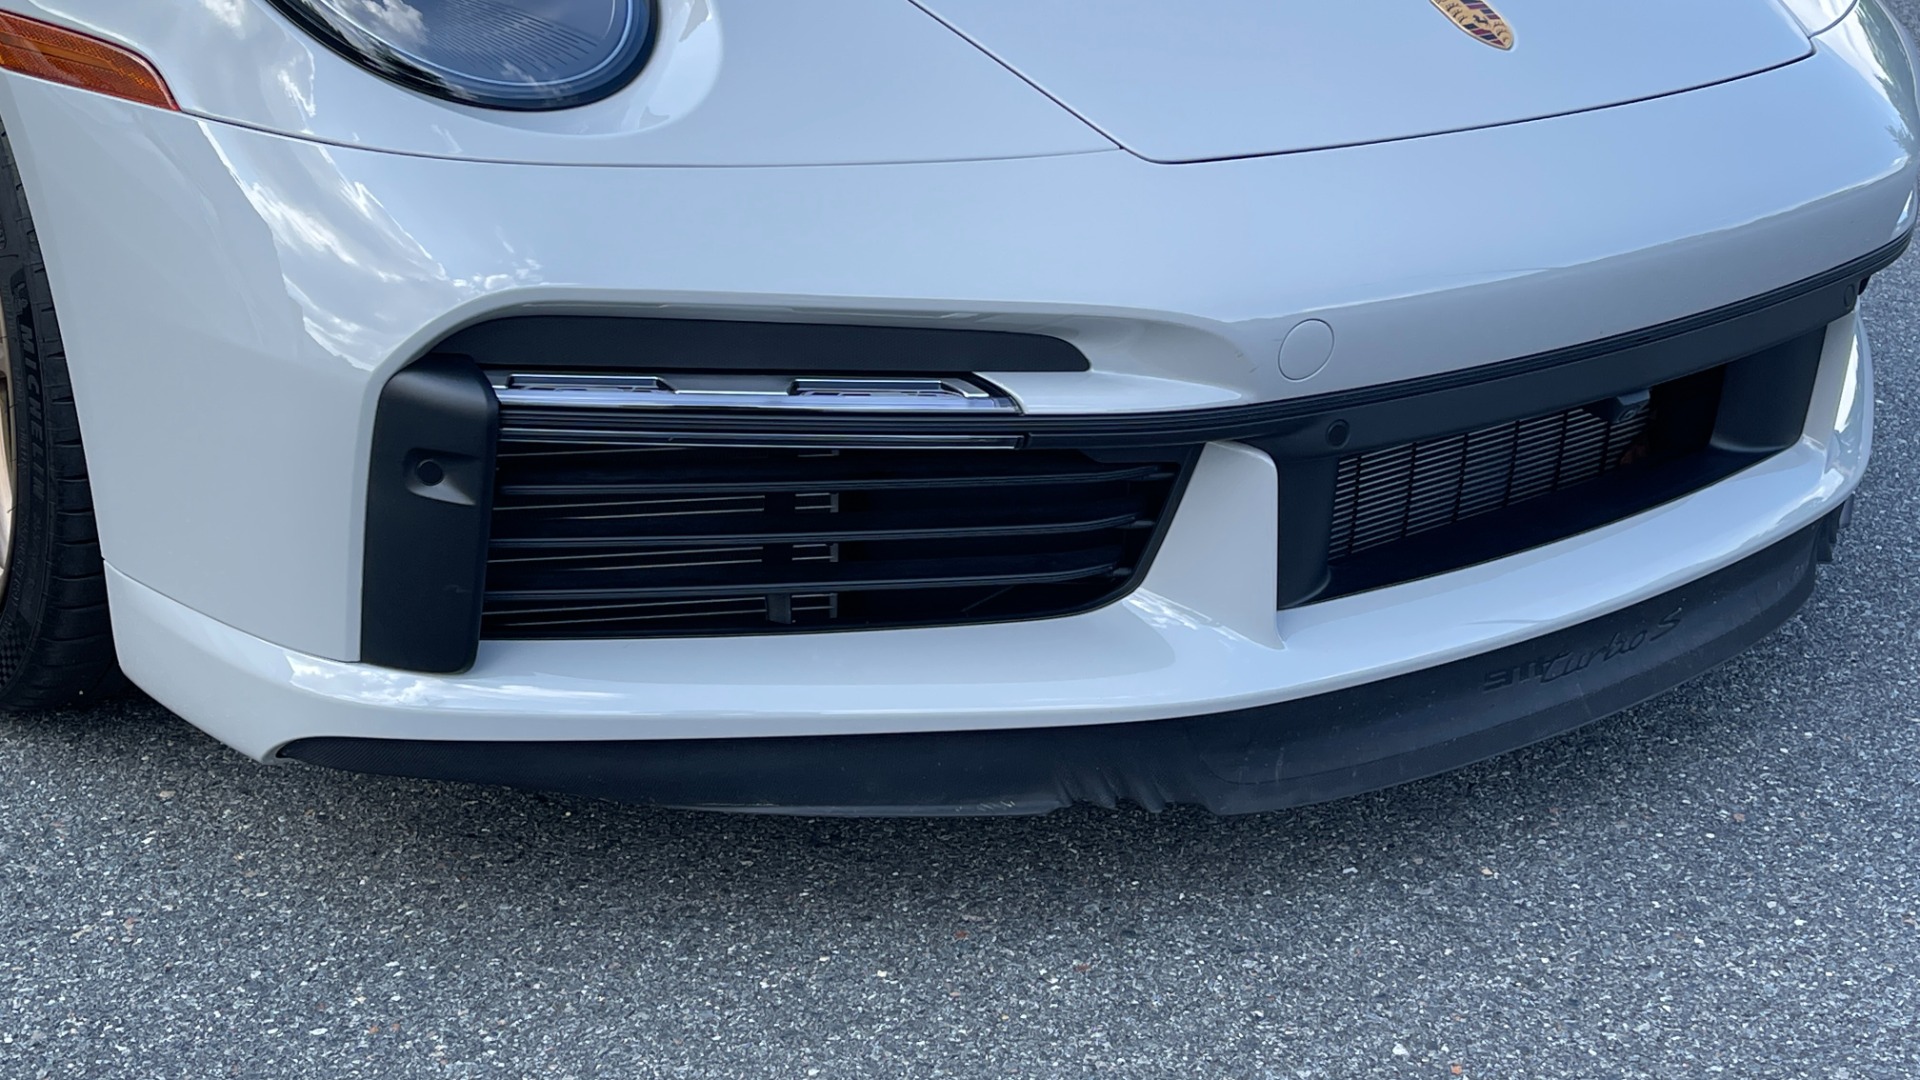 Used 2021 Porsche 911 Turbo S / HRE WHEELS / FRONT LIFT / MATRIX LIGHTS / PASM SUSPENSION for sale $279,000 at Formula Imports in Charlotte NC 28227 13